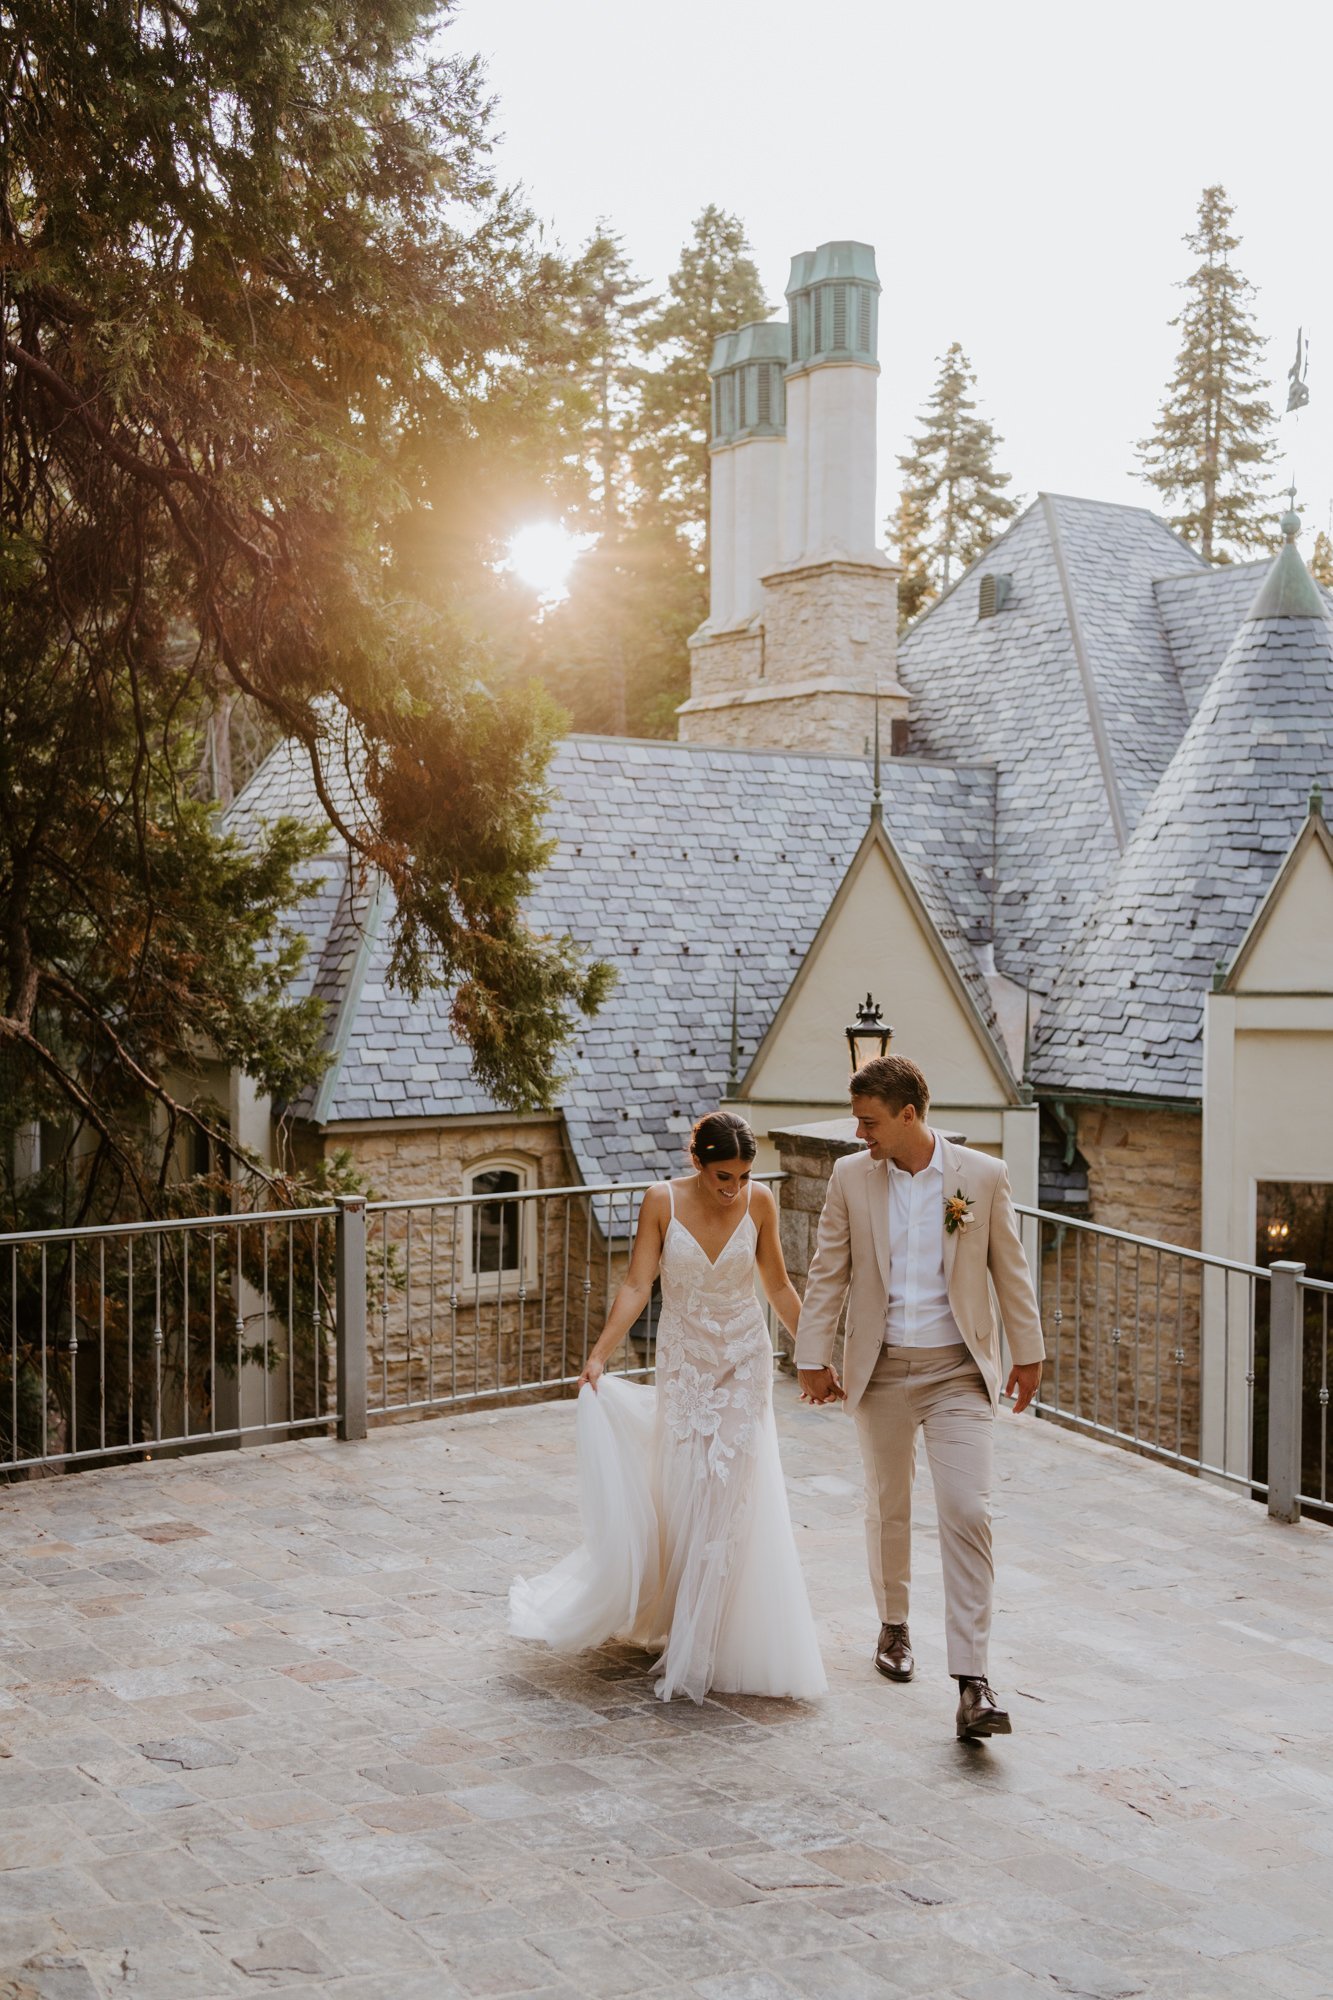 Romantic intimate and candid Bride and Groom portrait at Castle in the Forest in Lake Arrowhead, Castle Airbnb wedding in southern california, Photo by Tida Svy